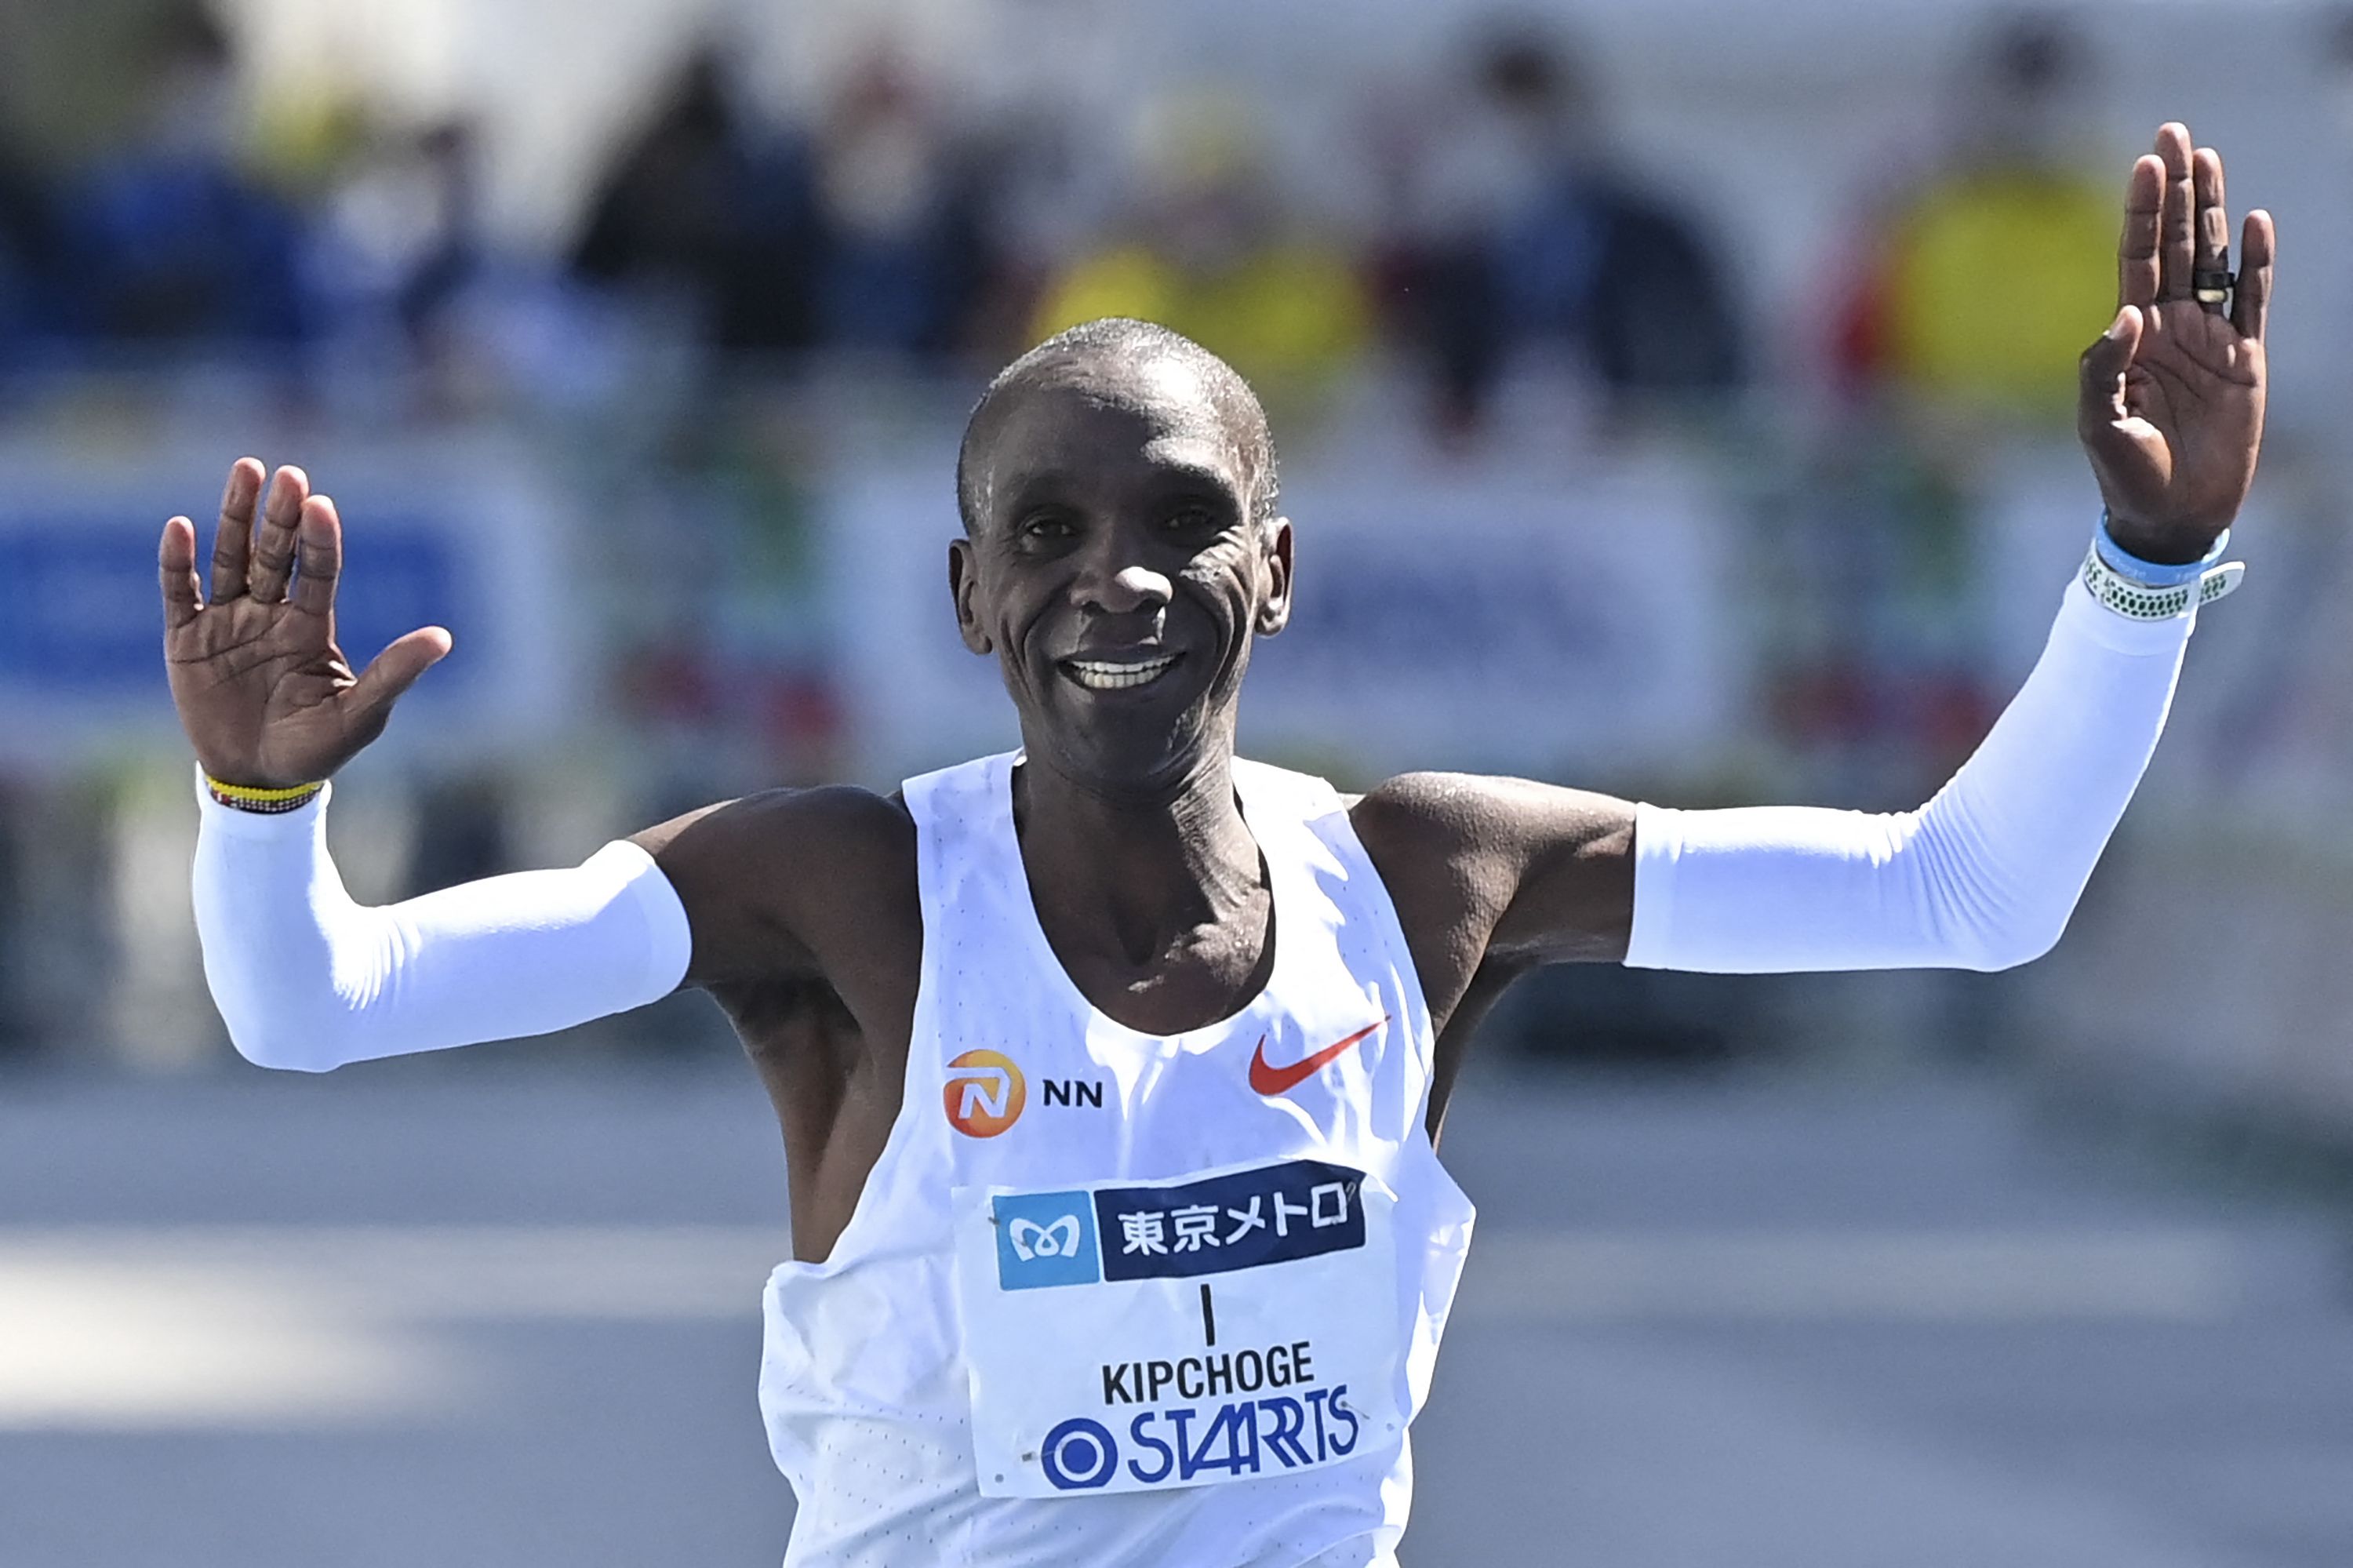 An Average Runner Demonstrates Just How Fast Eliud Kipchoge’s Marathon Pace Really Is